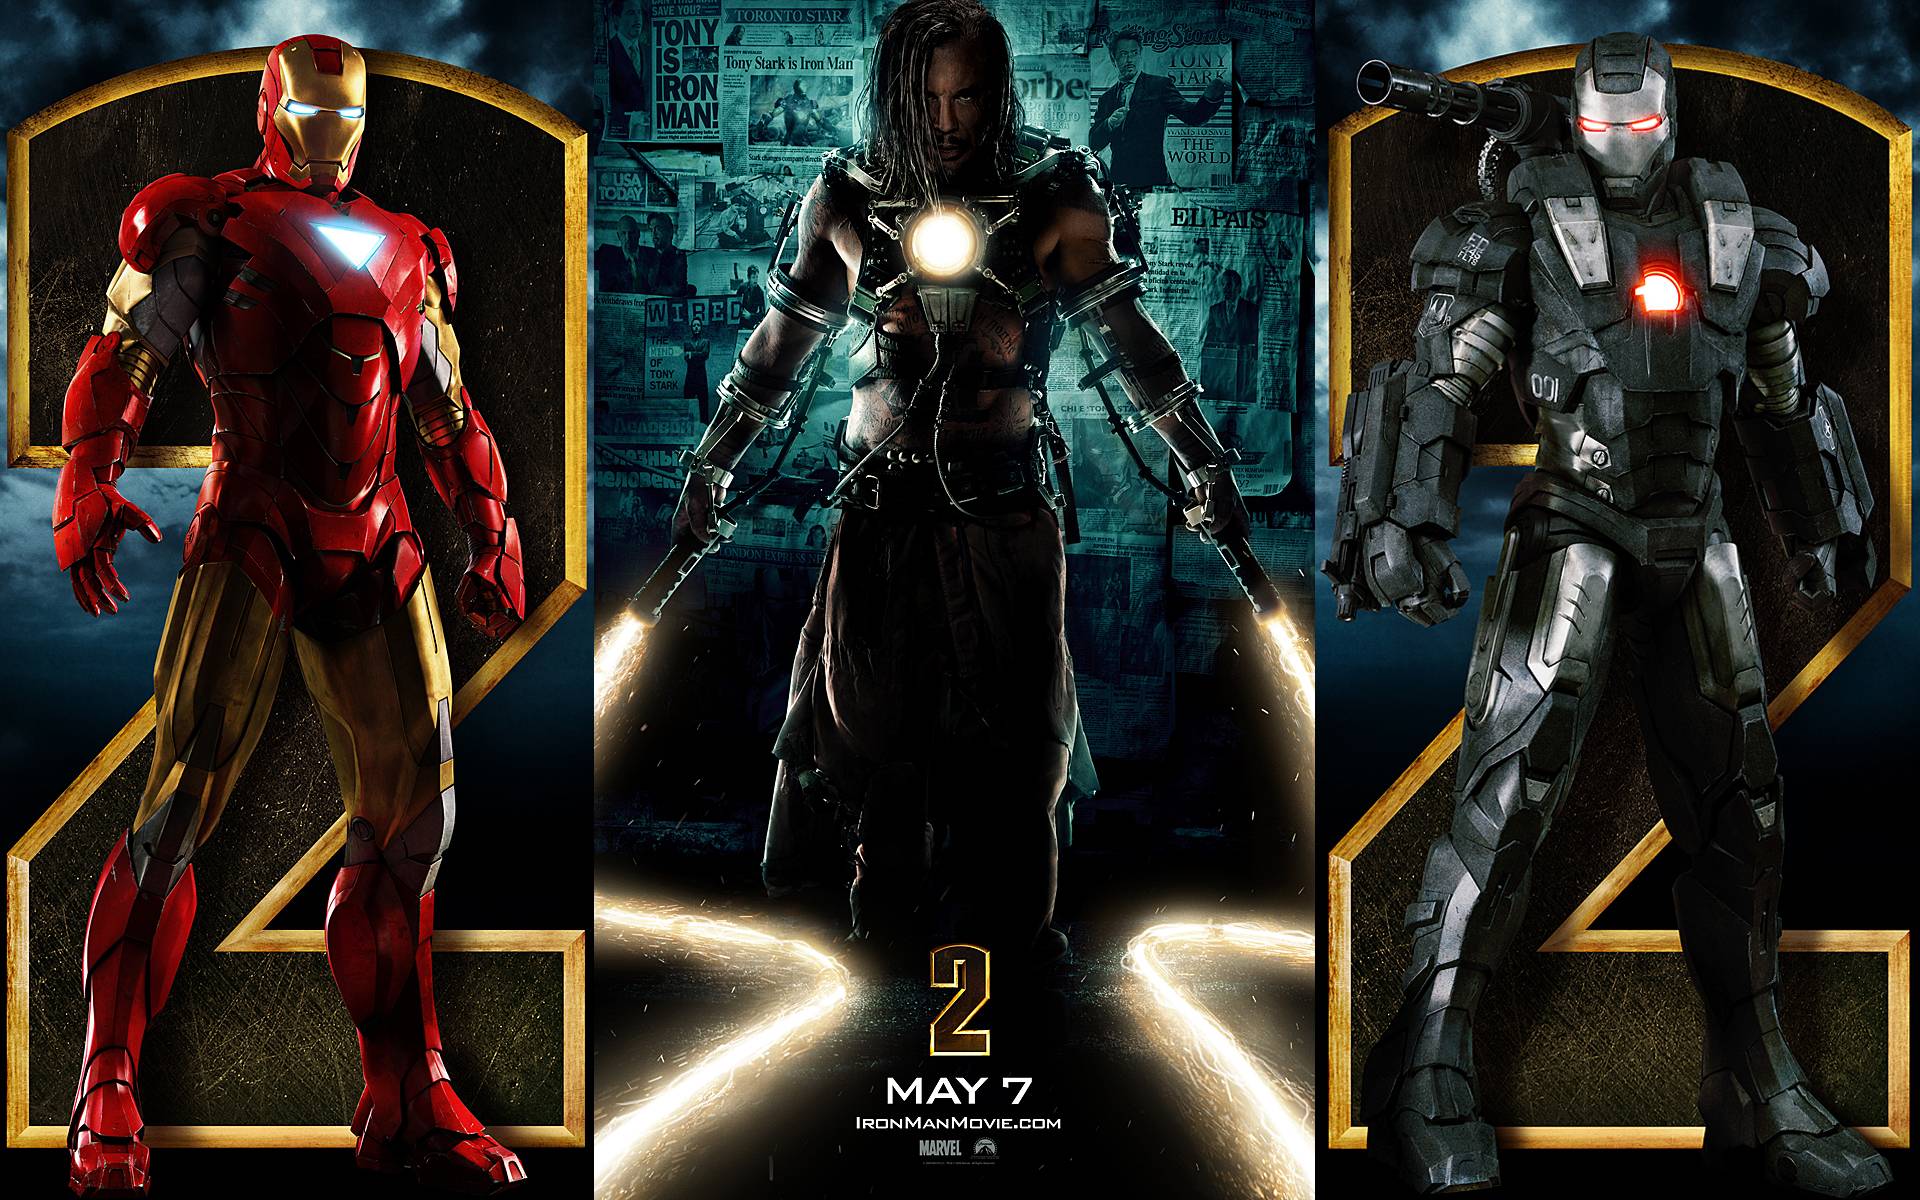 Iron Man 2 Wallpaper, wallpaper, Iron Man 2 Wallpapers hd wallpapers